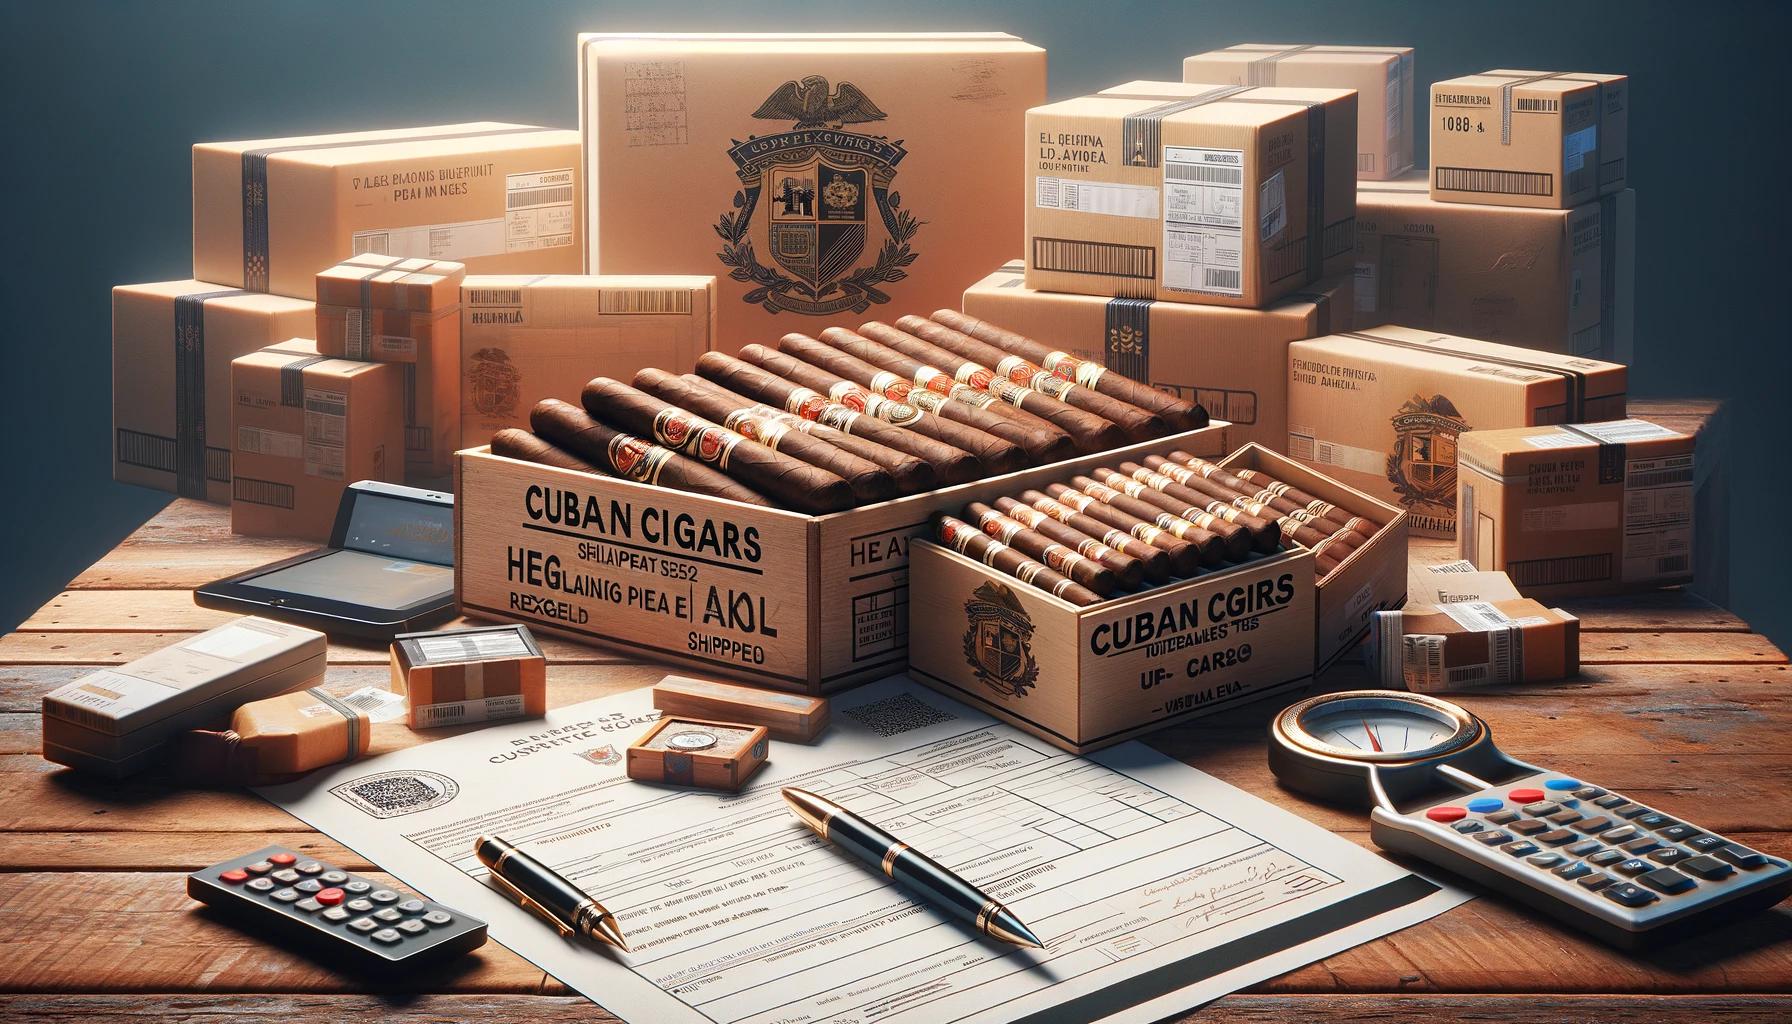 Can I Have Cuban Cigars Shipped to Me? 